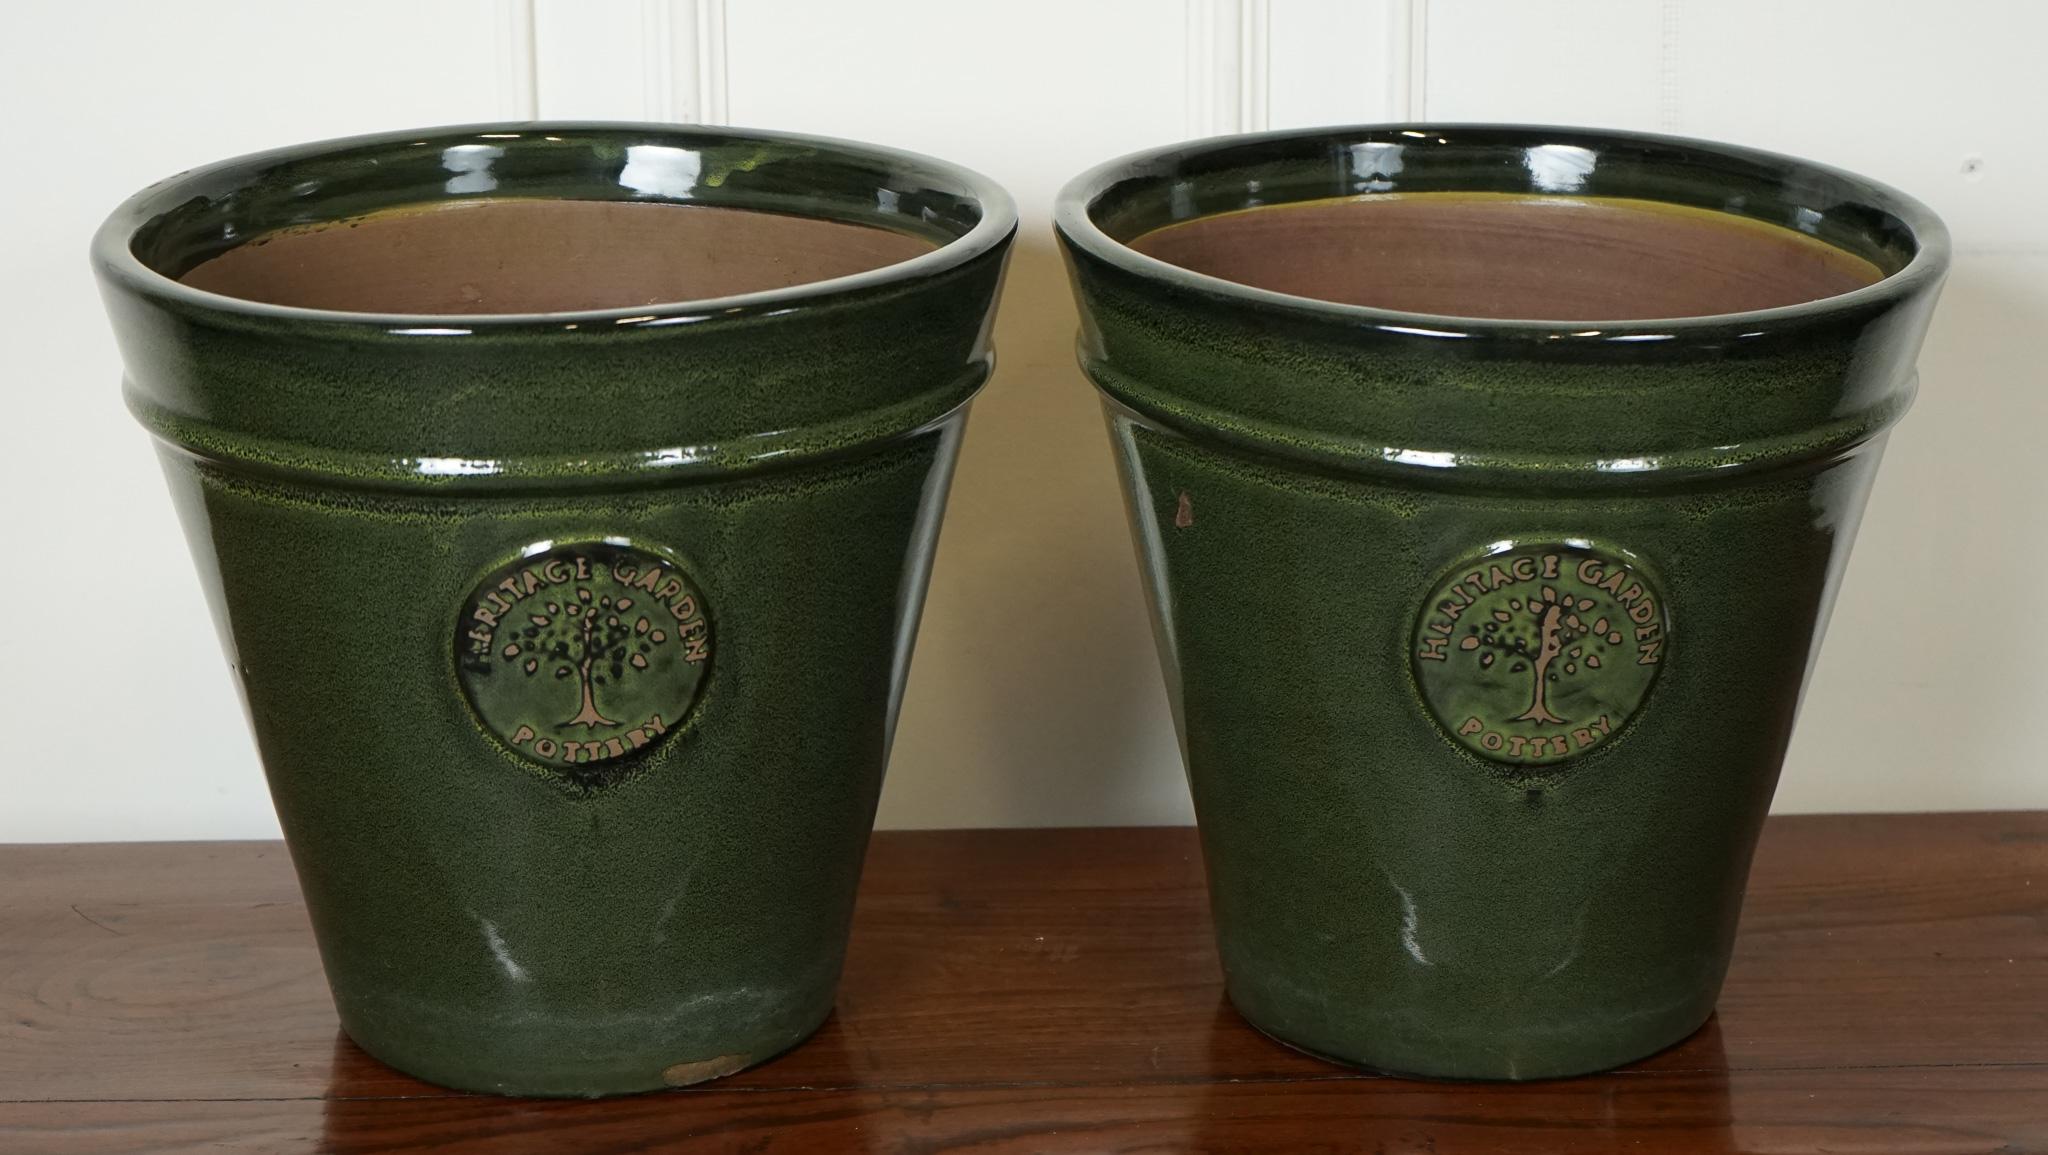 
We are delighted to offer for sale A Pair Of Green Edwardian-style Flower Plant Pots By Heritage Garden.

Crafted from high-quality materials, these plant pots feature a rich green colour that adds a touch of luxury to any indoor or outdoor space.